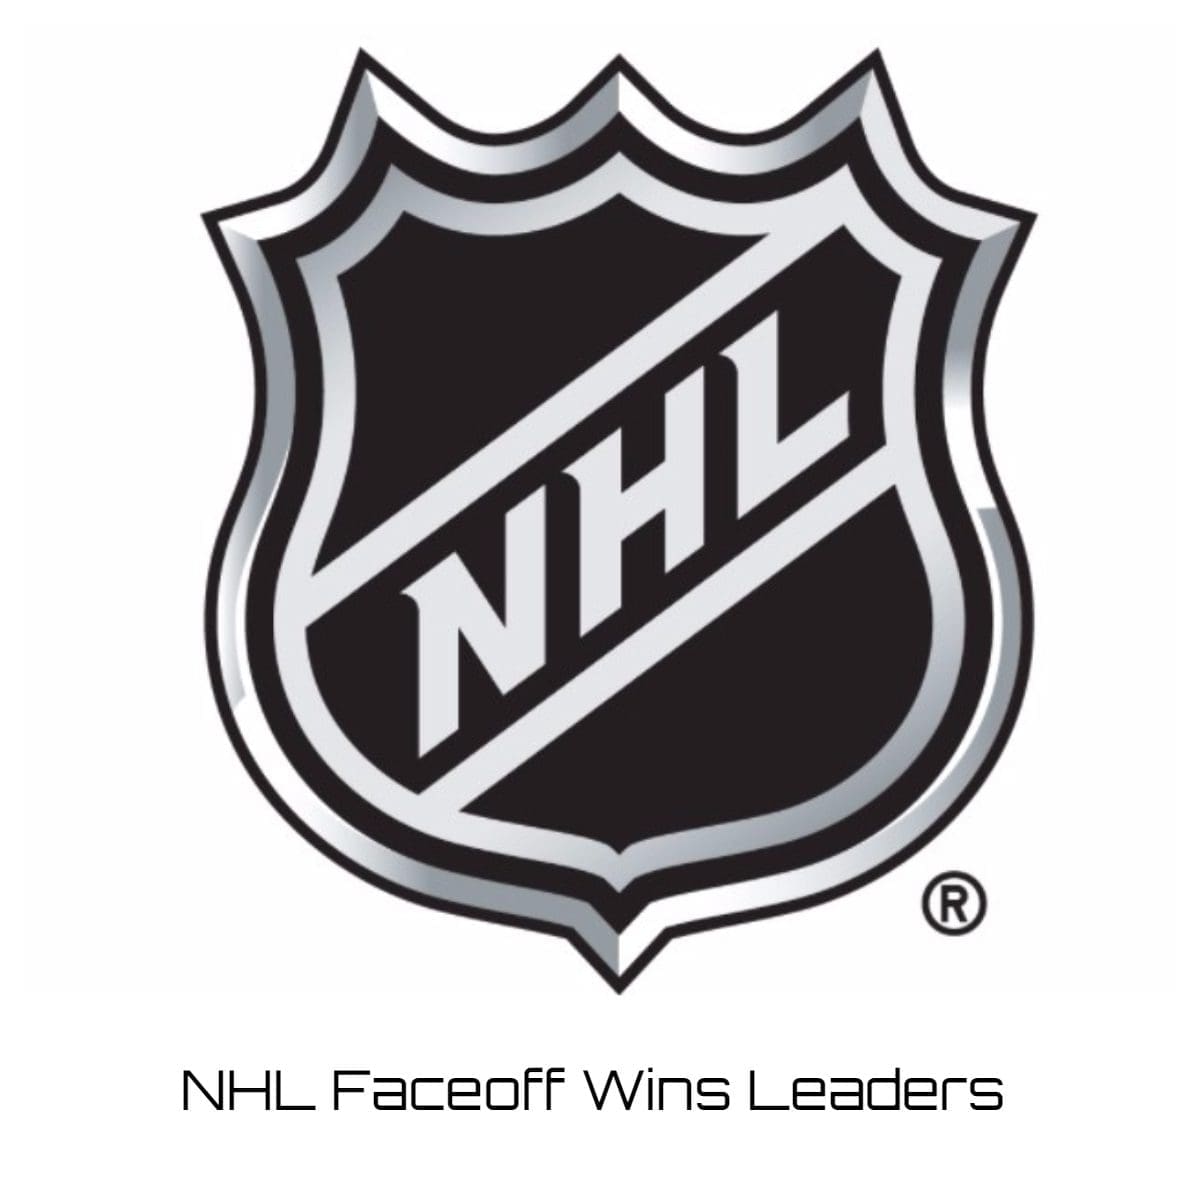 NHL Faceoff Wins Leaders